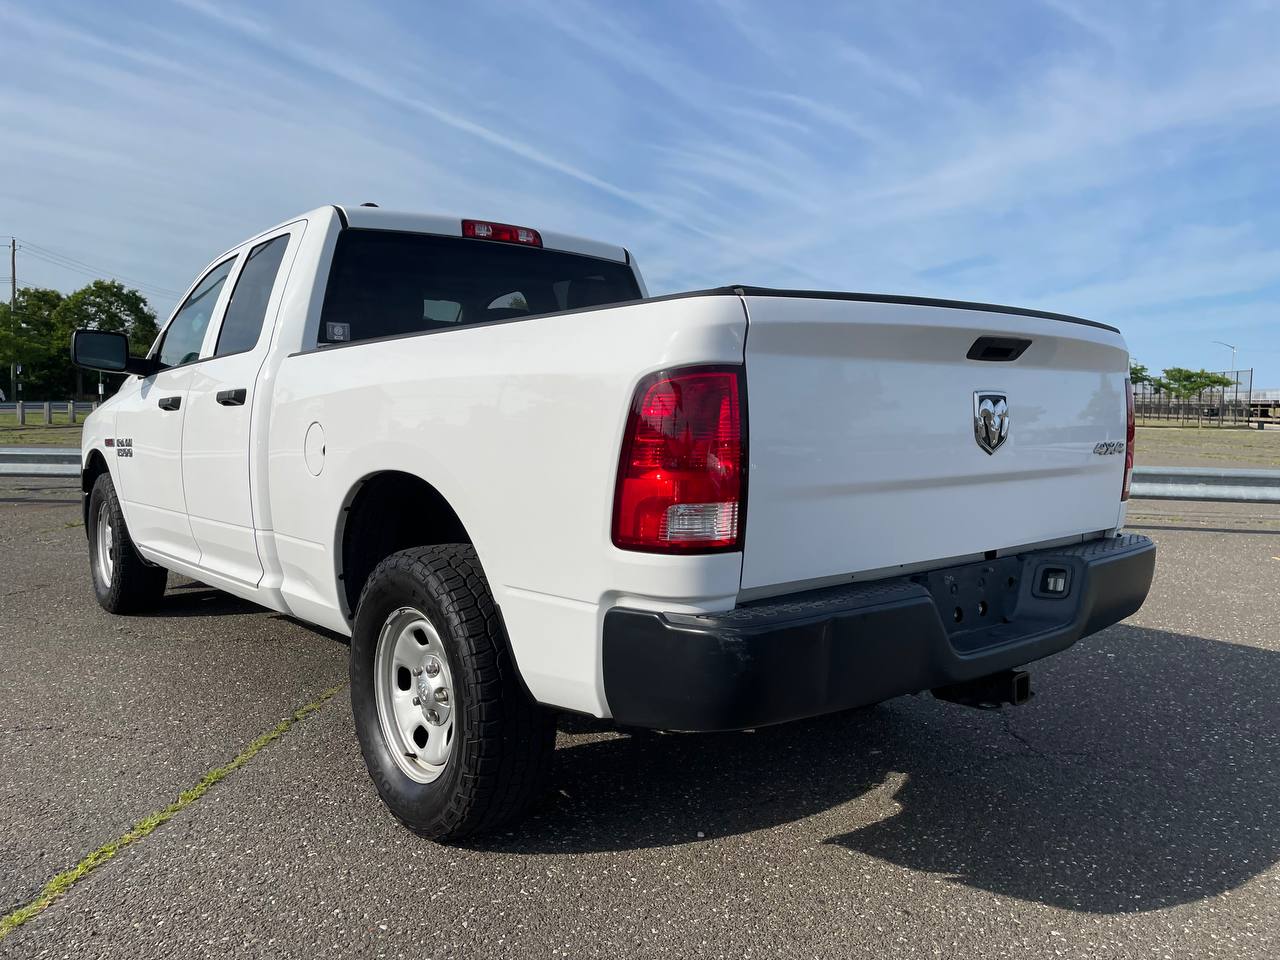 Used - RAM 1500 Tradesman 4x4 Diesel Pickup Truck for sale in Staten Island NY